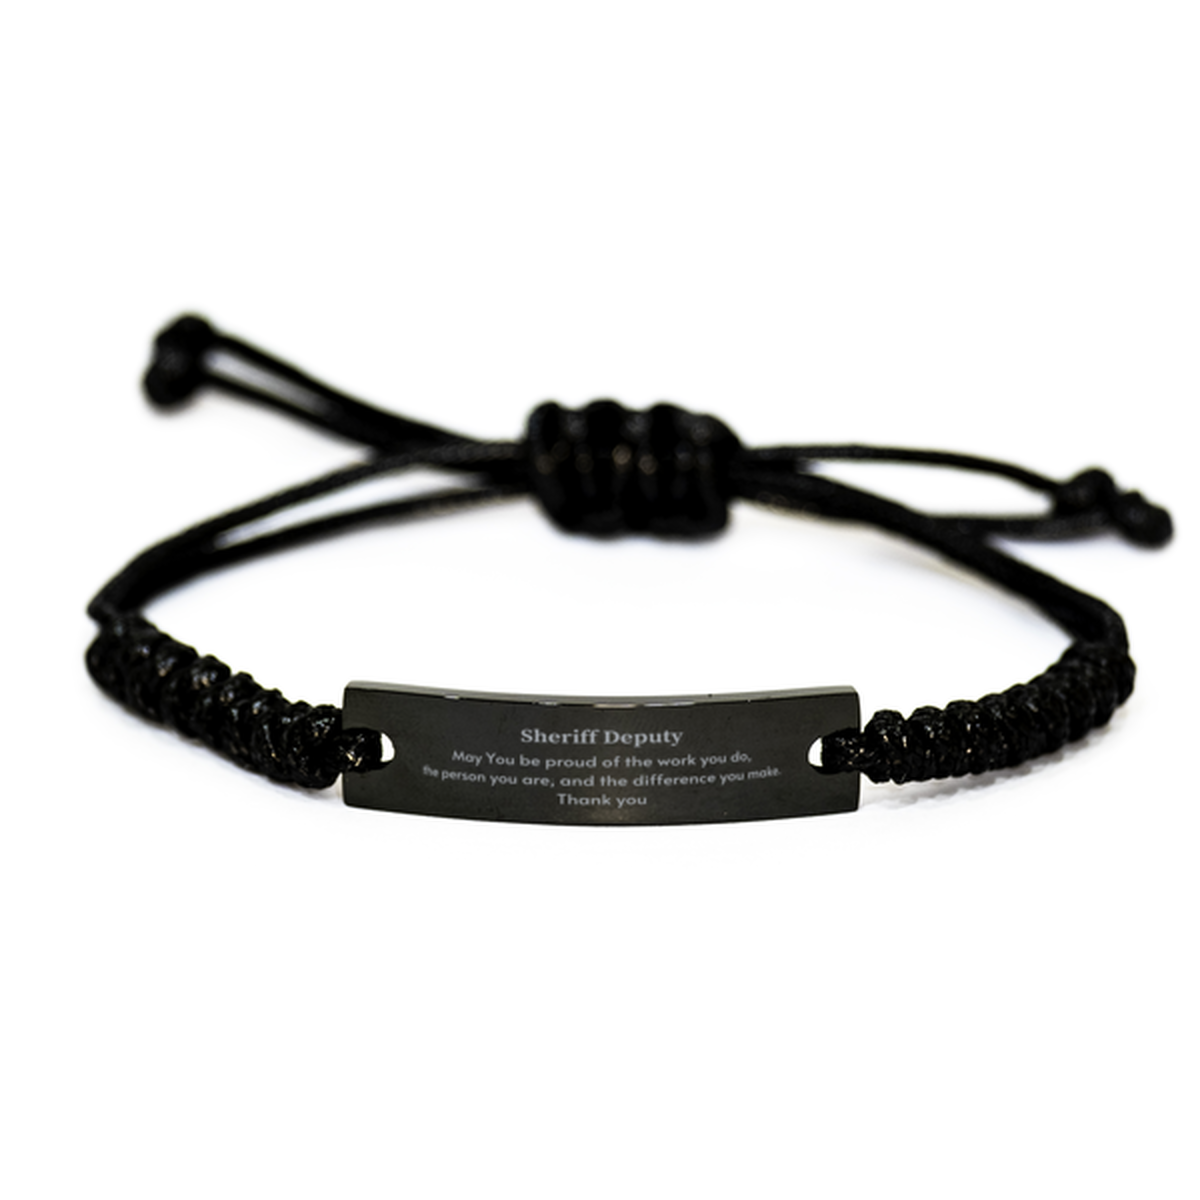 Heartwarming Black Rope Bracelet Retirement Coworkers Gifts for Sheriff Deputy, Sheriff Deputy May You be proud of the work you do, the person you are Gifts for Boss Men Women Friends